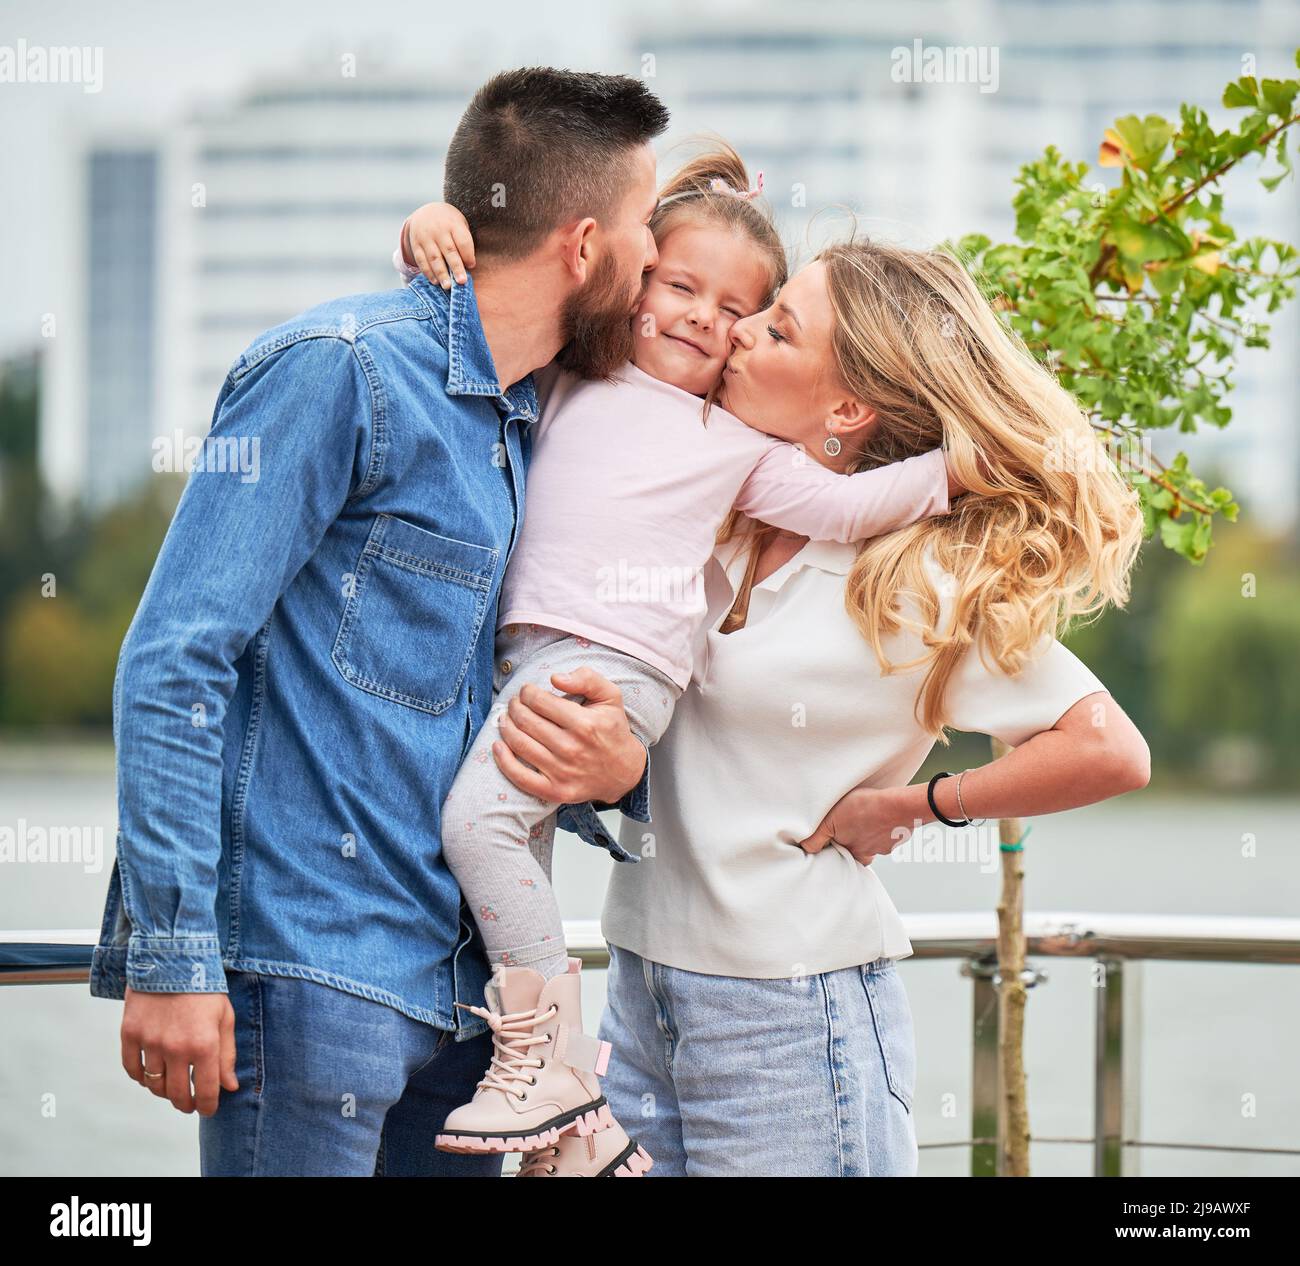 Man and woman standing on the street and kissing little girl in cheeks. Father holding adorable child and placing kiss on kid cheek while spending time with family outdoors in new urban district. Stock Photo